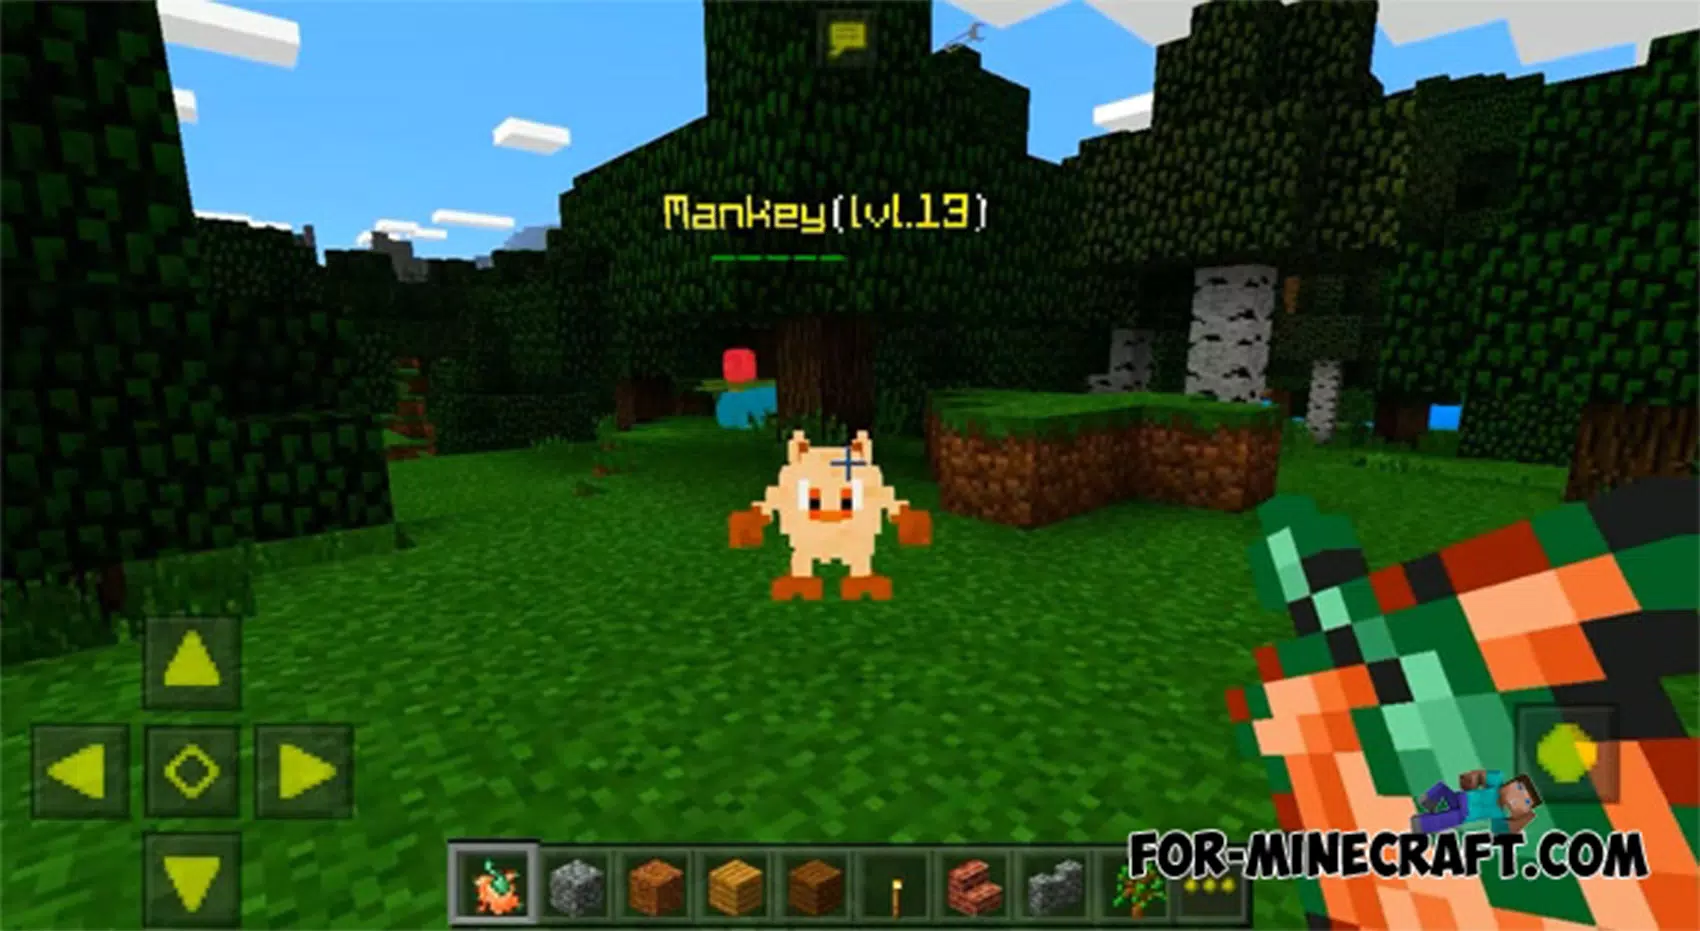 Pokecraft APK Download for Android Free